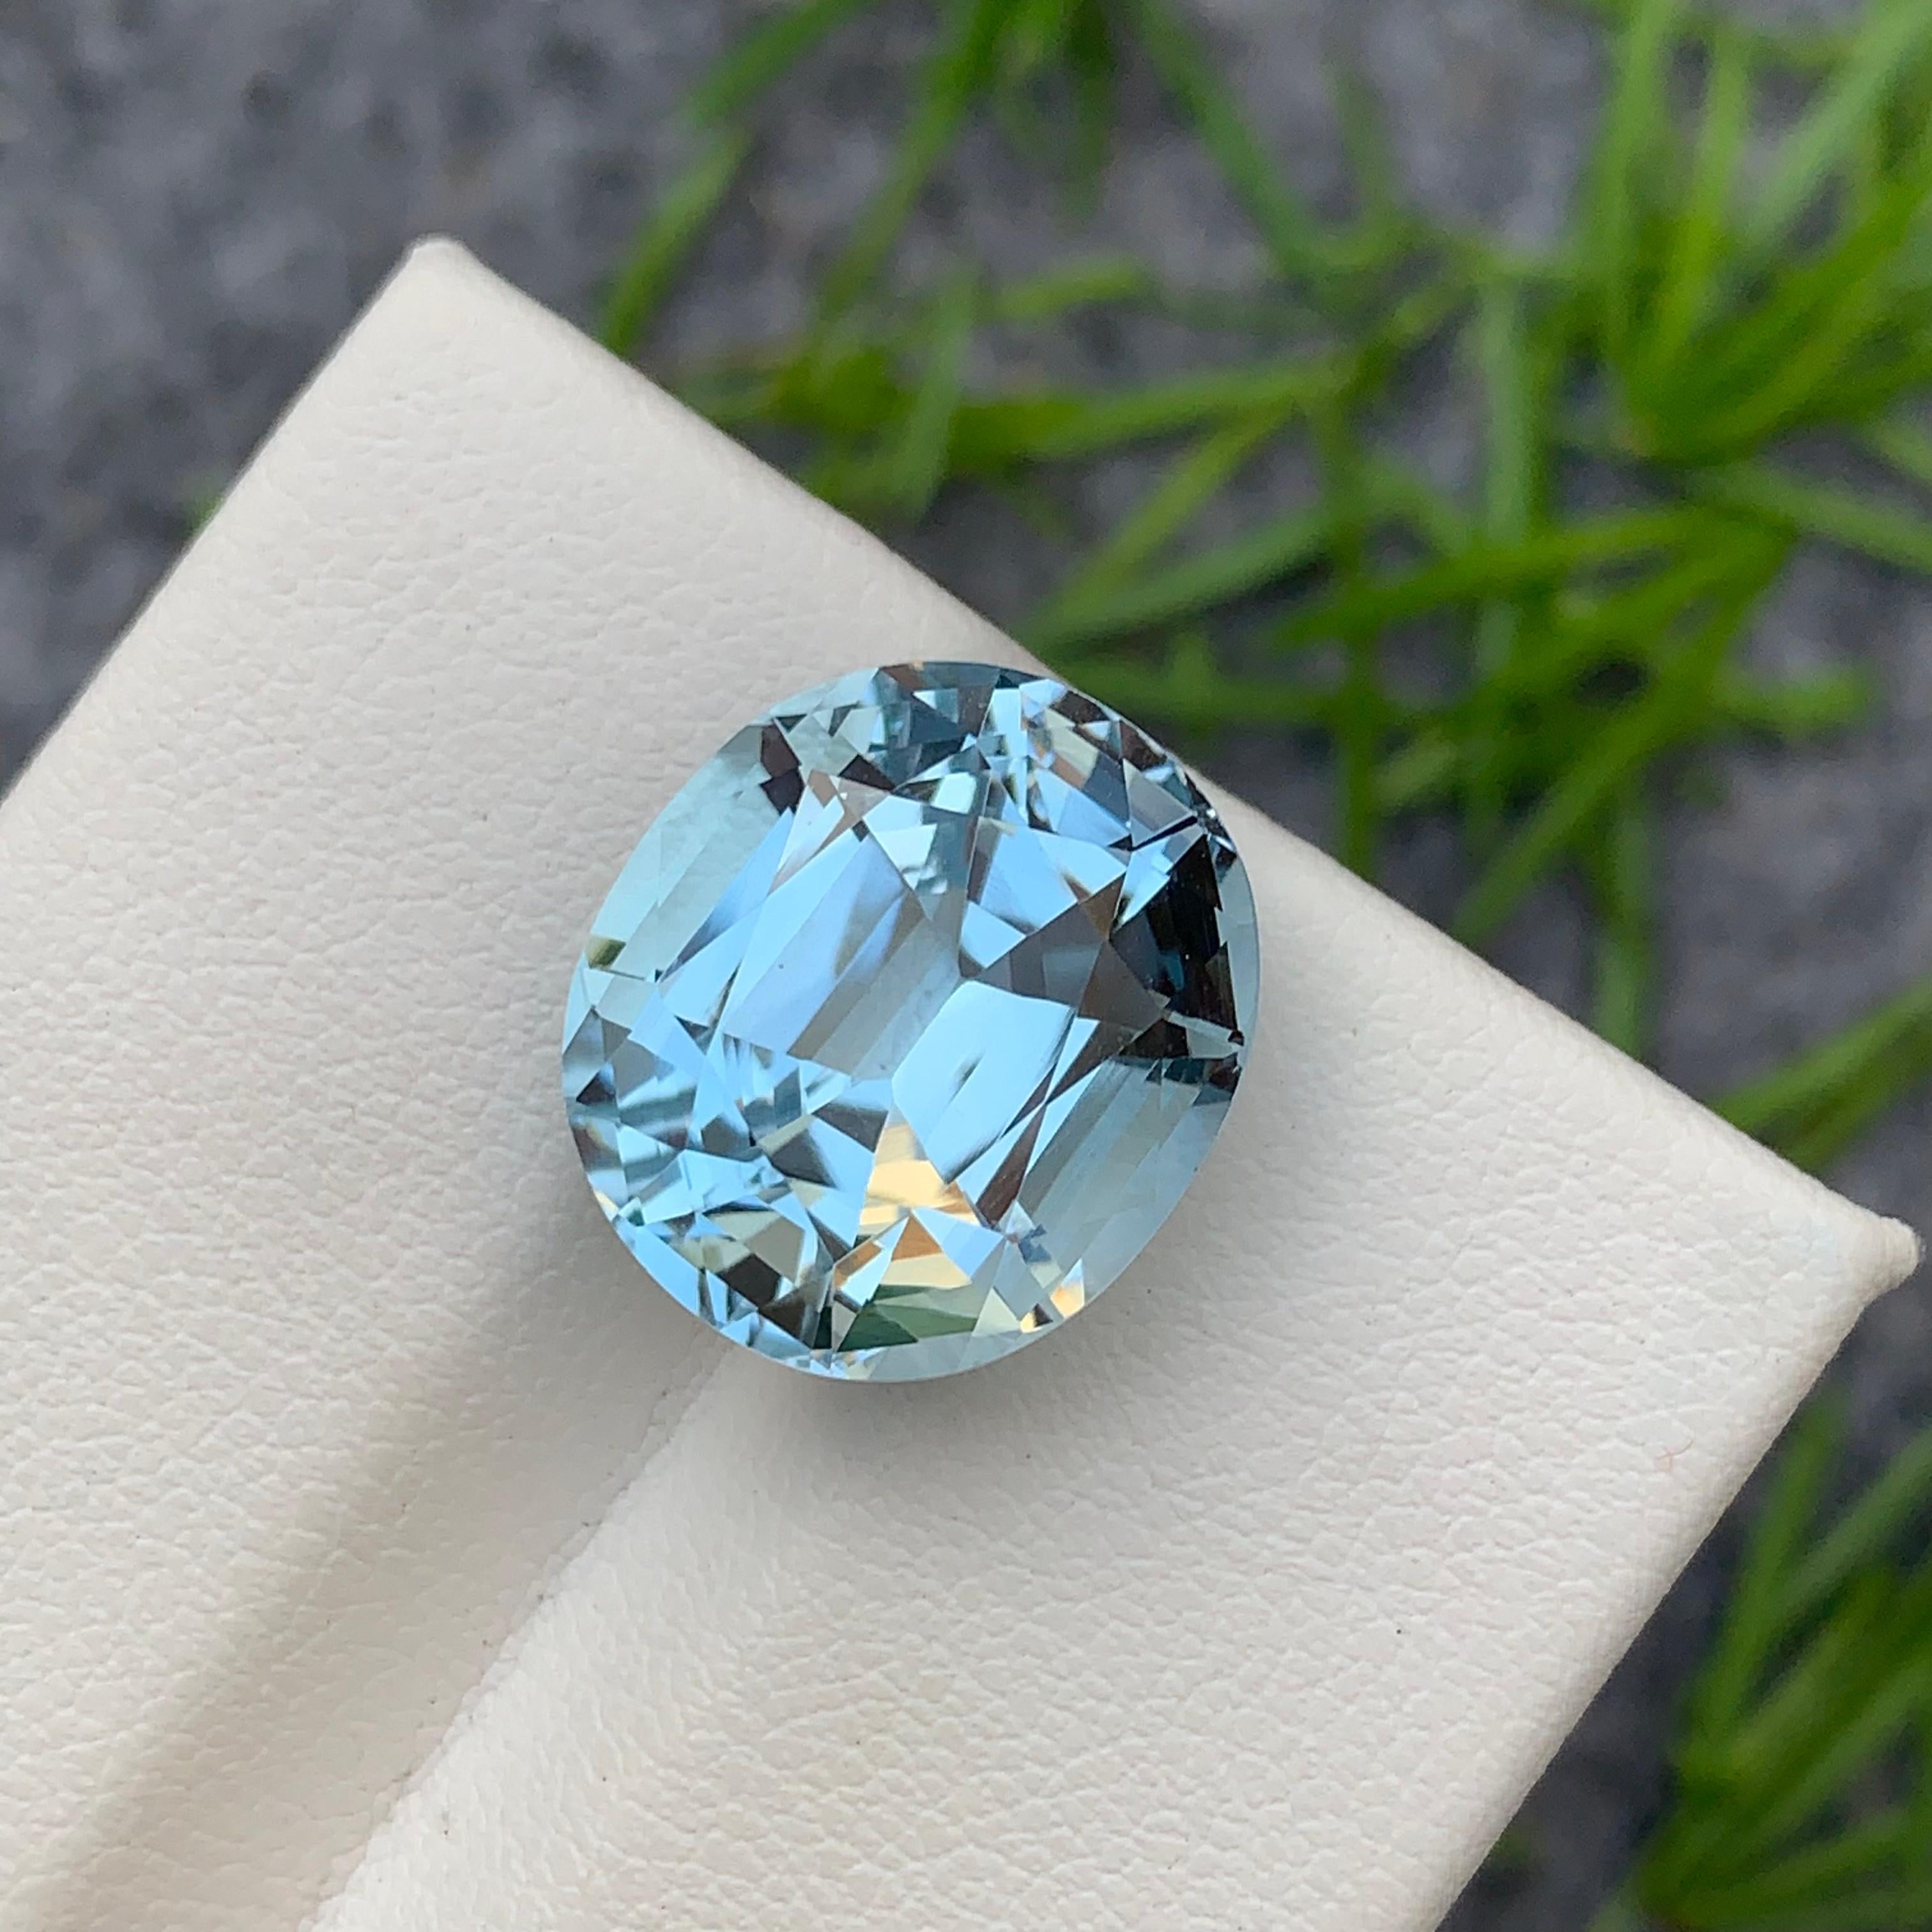 18.75 Carat Faceted Light Blue Topaz Cushion Cut Gemstone from Brazil Mine For Sale 2